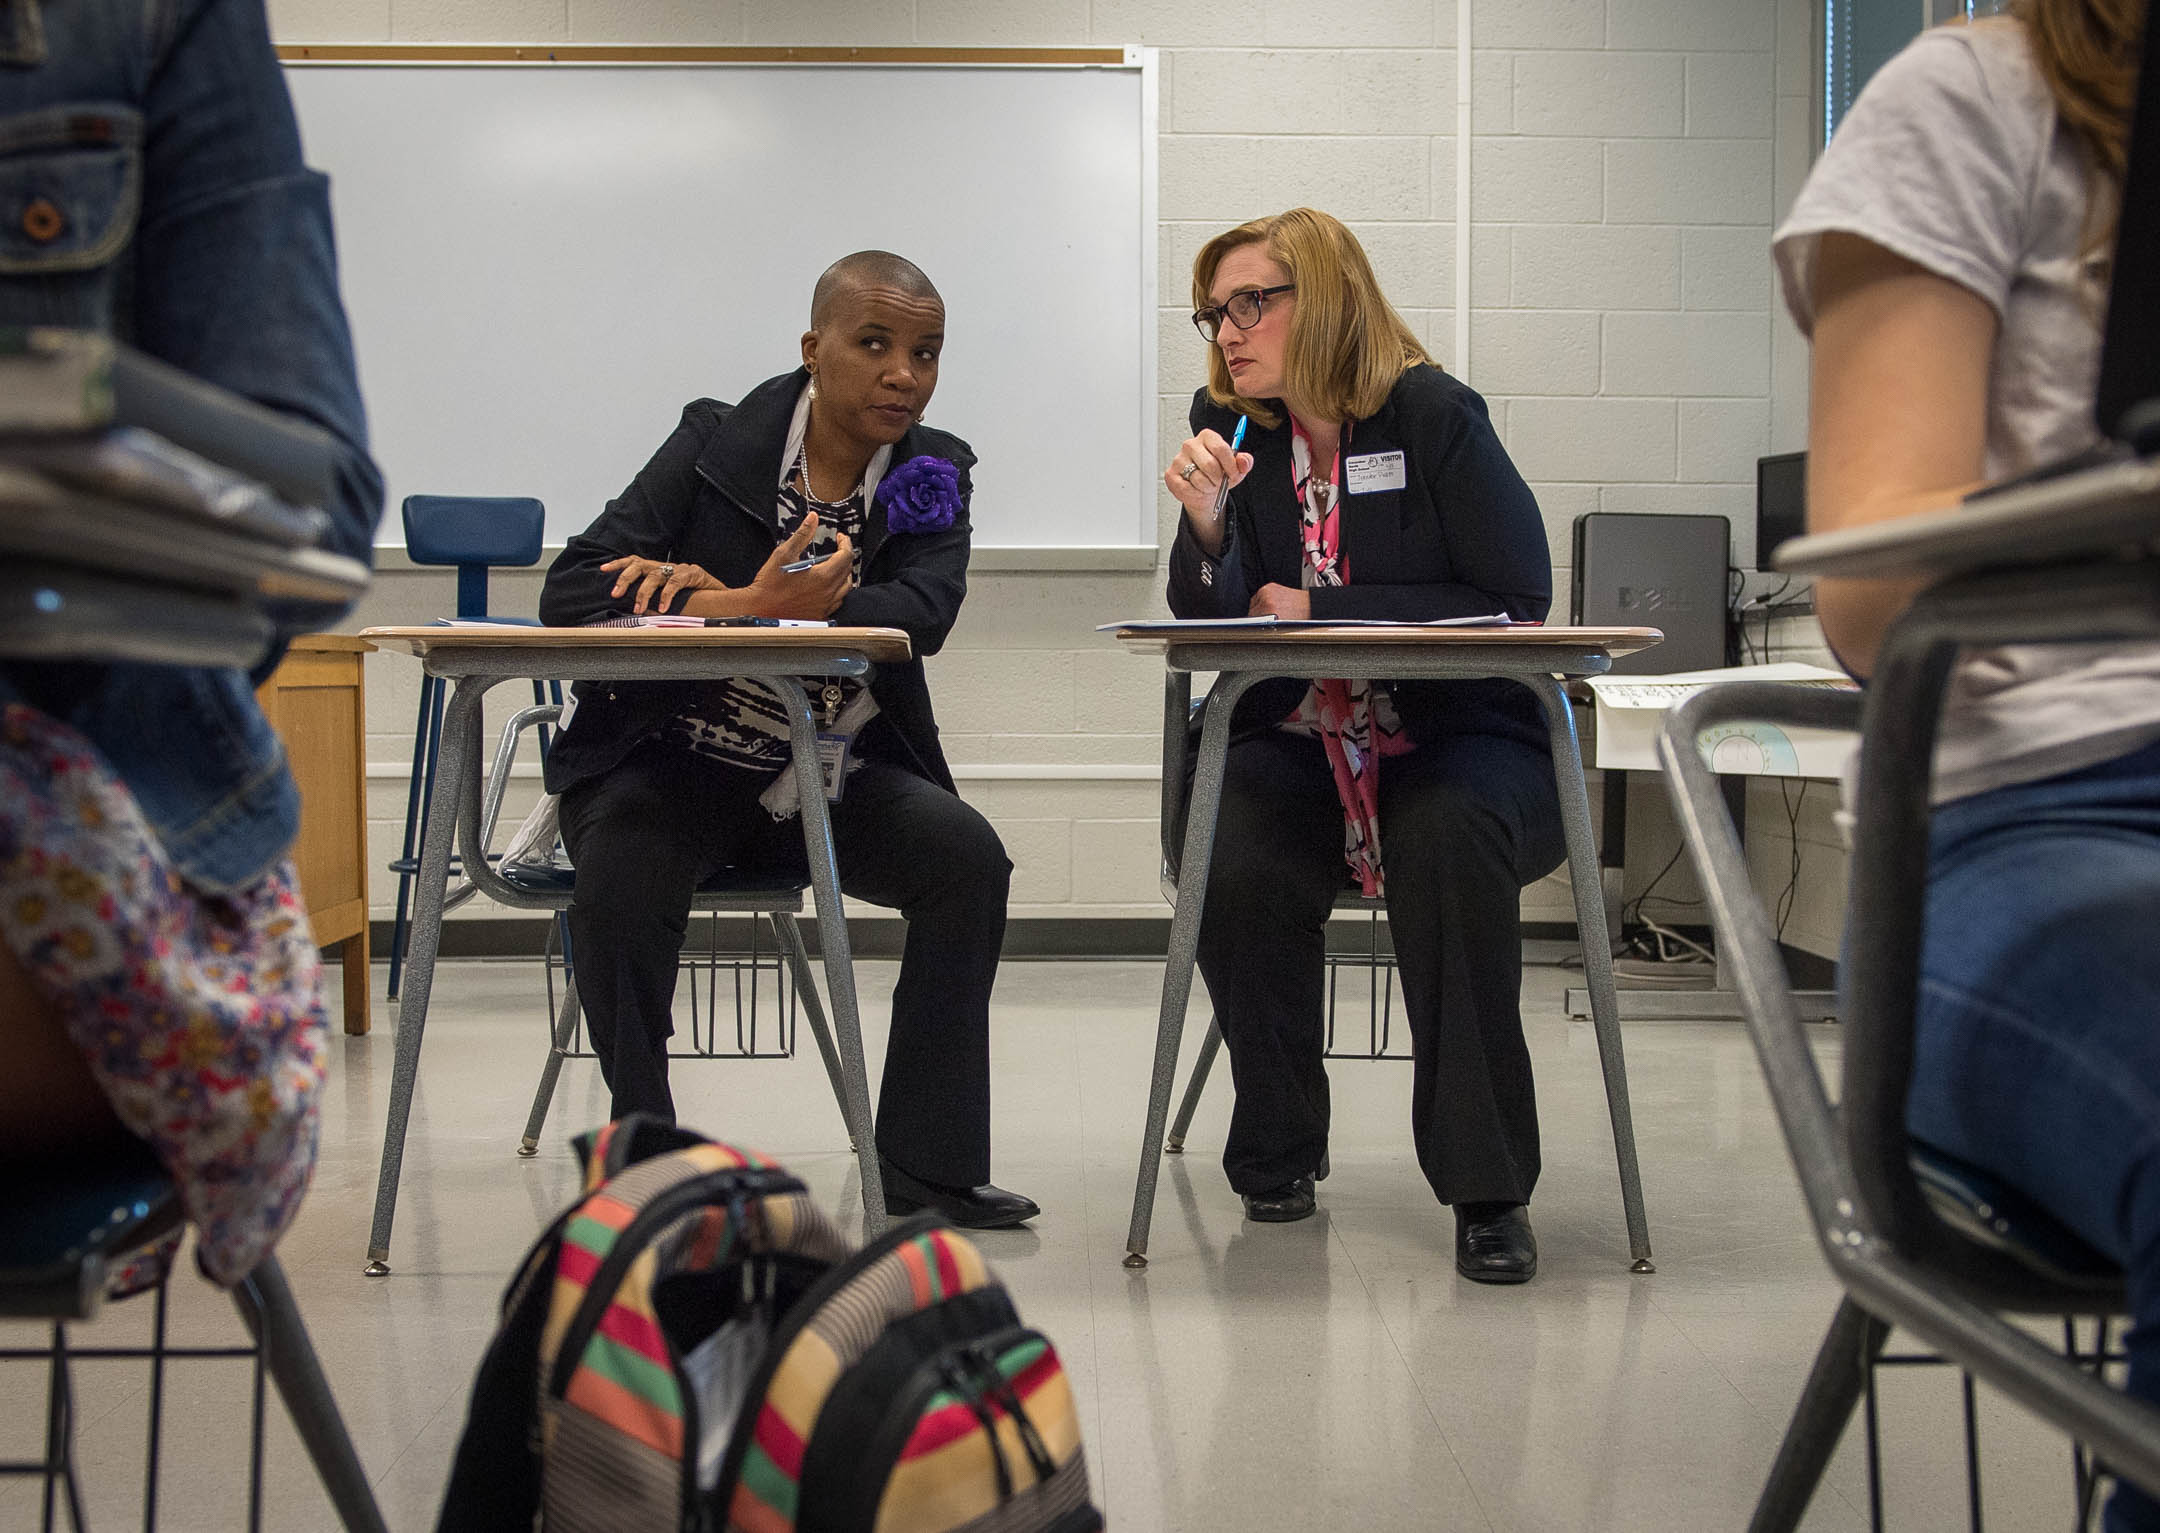 James-Etta Goodloe, left, and Jennifer Pusateri take notes while observing a class at Columbus North High School in Columbus, Ind. The school has been using Universal Design for Learning and Culturally Responsive Teaching concepts for more than a decade. Photo by Bobby Ellis, April 13, 2017